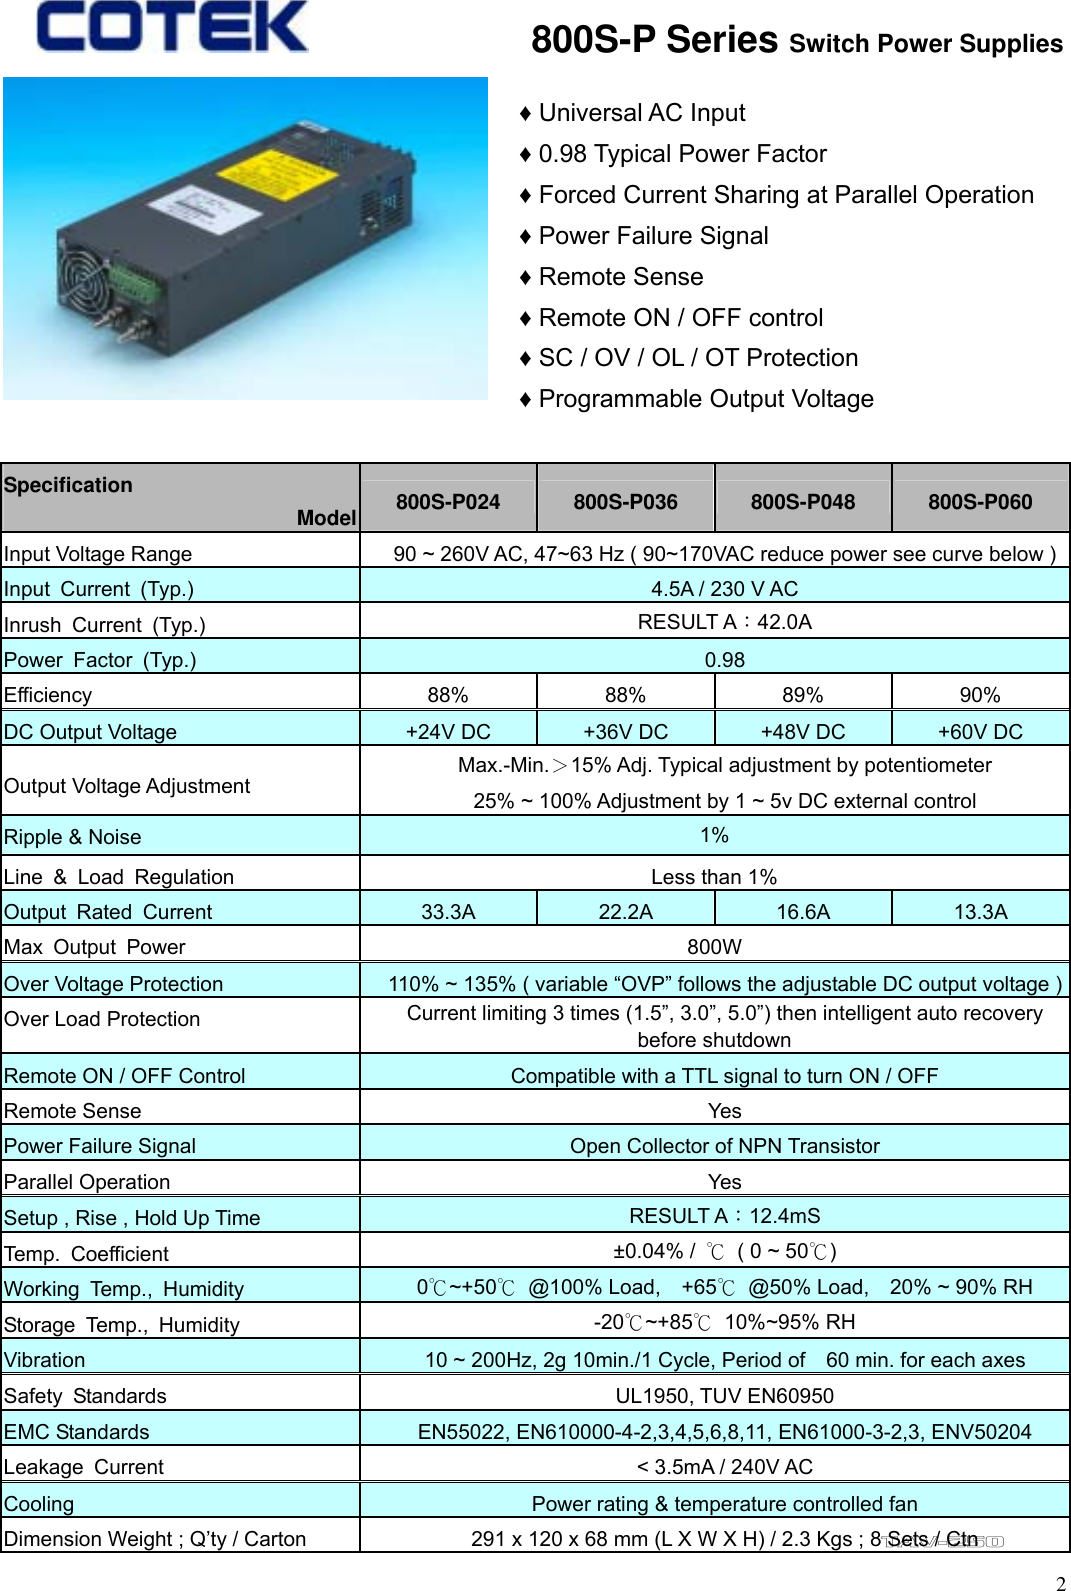       800S-P Series Switch Power Supplies ♦ Universal AC Input ♦ 0.98 Typical Power Factor   ♦ Forced Current Sharing at Parallel Operation ♦ Power Failure Signal ♦ Remote Sense ♦ Remote ON / OFF control   ♦ SC / OV / OL / OT Protection ♦ Programmable Output Voltage  Specification       Model 800S-P024  800S-P036  800S-P048  800S-P060 Input Voltage Range  90 ~ 260V AC, 47~63 Hz ( 90~170VAC reduce power see curve below )Input Current (Typ.)  4.5A / 230 V AC Inrush Current (Typ.)  RESULT A：42.0A Power Factor (Typ.)  0.98  Efficiency  88% 88% 89% 90% DC Output Voltage  +24V DC  +36V DC  +48V DC  +60V DC Output Voltage Adjustment Max.-Min.＞15% Adj. Typical adjustment by potentiometer 25% ~ 100% Adjustment by 1 ~ 5v DC external control Ripple &amp; Noise  1% Line &amp; Load Regulation  Less than 1% Output Rated Current  33.3A  22.2A  16.6A  13.3A Max Output Power  800W Over Voltage Protection  110% ~ 135% ( variable “OVP” follows the adjustable DC output voltage )Over Load Protection    Current limiting 3 times (1.5”, 3.0”, 5.0”) then intelligent auto recovery before shutdown   Remote ON / OFF Control    Compatible with a TTL signal to turn ON / OFF   Remote Sense  Yes Power Failure Signal  Open Collector of NPN Transistor Parallel Operation  Yes Setup , Rise , Hold Up Time    RESULT A：12.4mS Temp. Coefficient   ±0.04% /  ℃  ( 0 ~ 50℃) Working Temp., Humidity   0℃~+50℃ @100% Load,  +65℃  @50% Load,    20% ~ 90% RH Storage Temp., Humidity   -20℃~+85℃ 10%~95% RH Vibration   10 ~ 200Hz, 2g 10min./1 Cycle, Period of    60 min. for each axes Safety Standards   UL1950, TUV EN60950 EMC Standards    EN55022, EN610000-4-2,3,4,5,6,8,11, EN61000-3-2,3, ENV50204 Leakage Current   &lt; 3.5mA / 240V AC Cooling  Power rating &amp; temperature controlled fan   Dimension Weight ; Q’ty / Carton    291 x 120 x 68 mm (L X W X H) / 2.3 Kgs ; 8 Sets / Ctn  2TAV-250